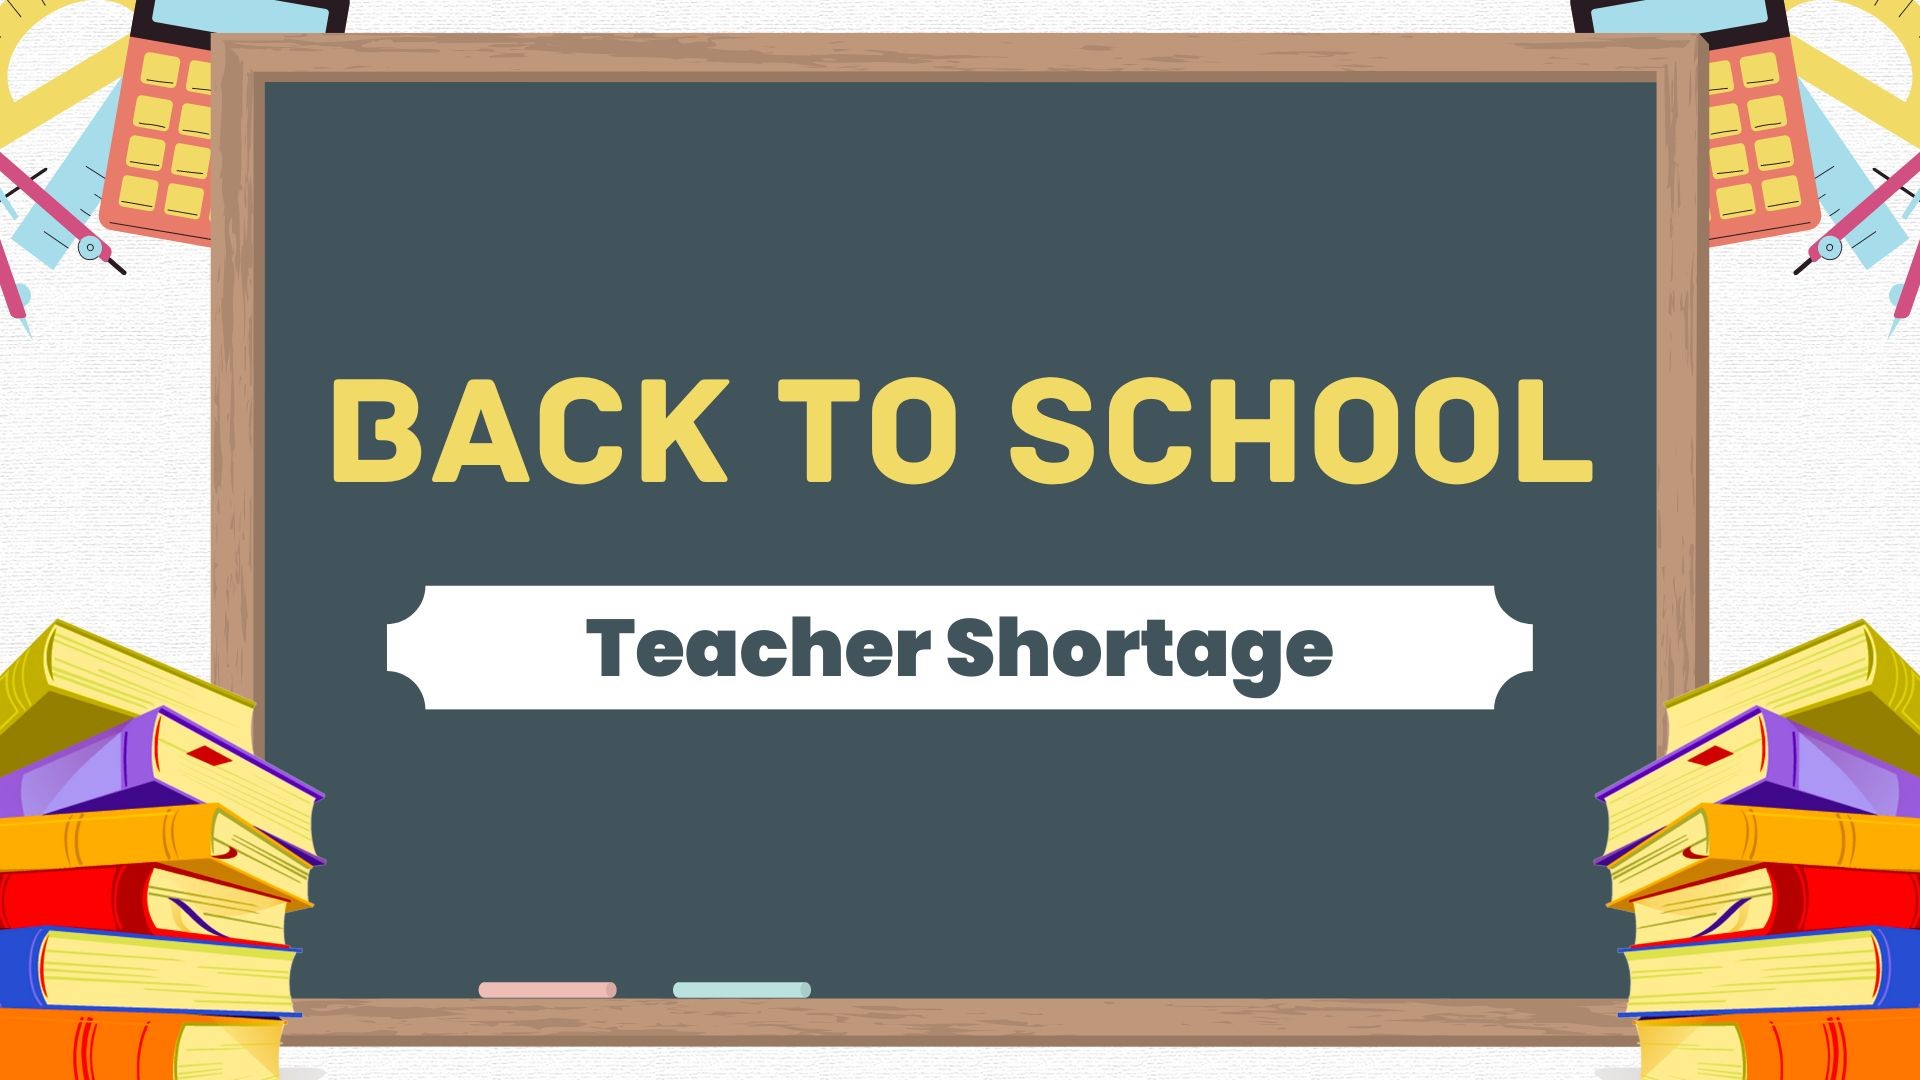 A look at why there is a teacher shortage across the U.S., and how some states and school districts are working to combat the lack of staffing.